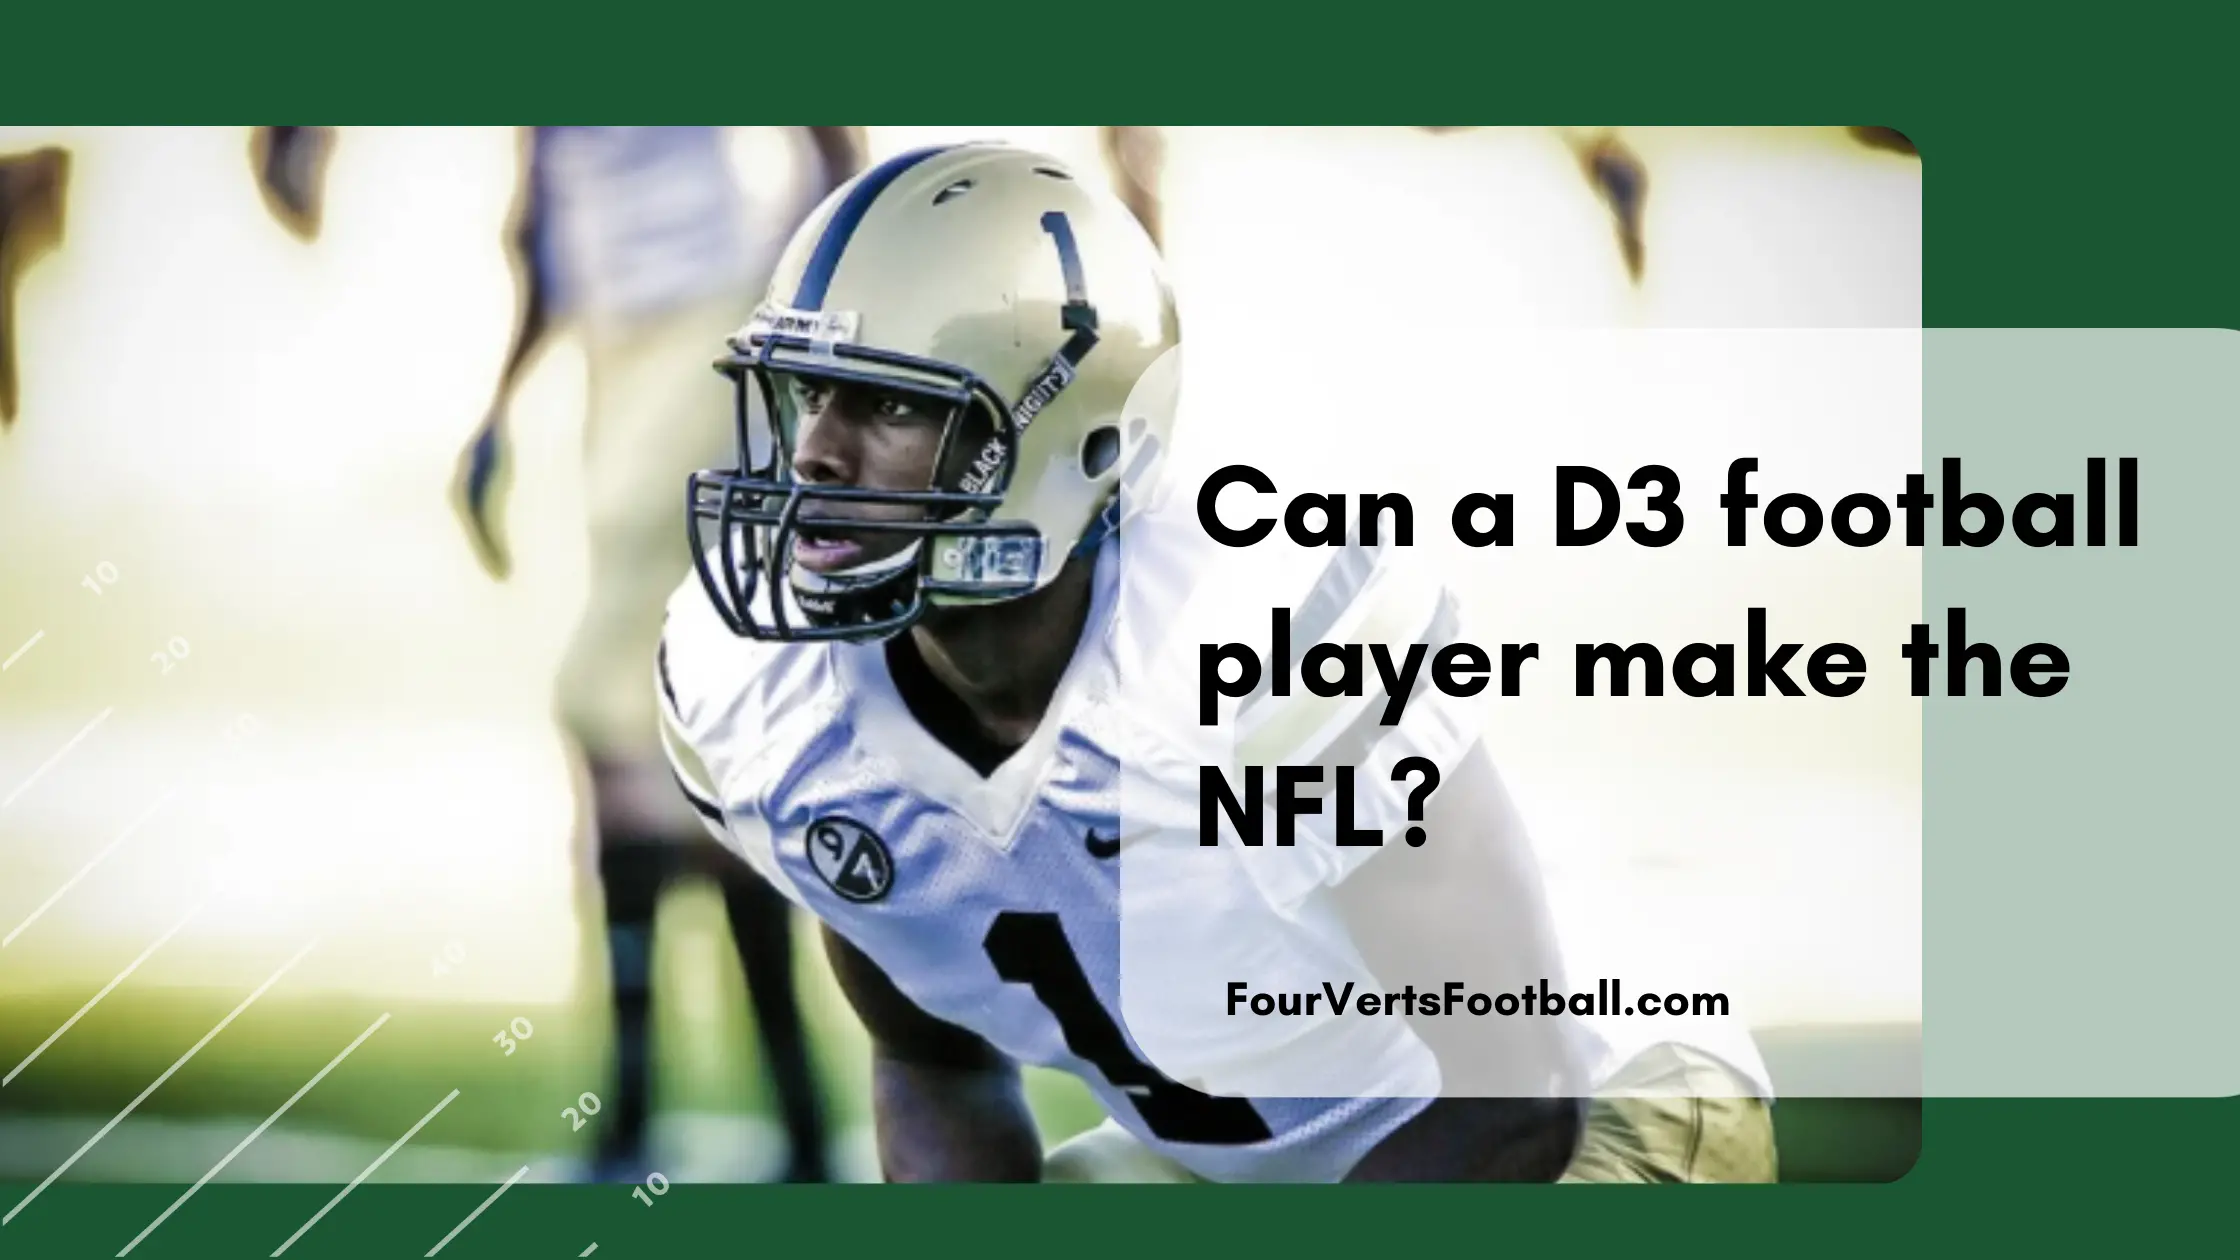 Can a D3 football player make the NFL?